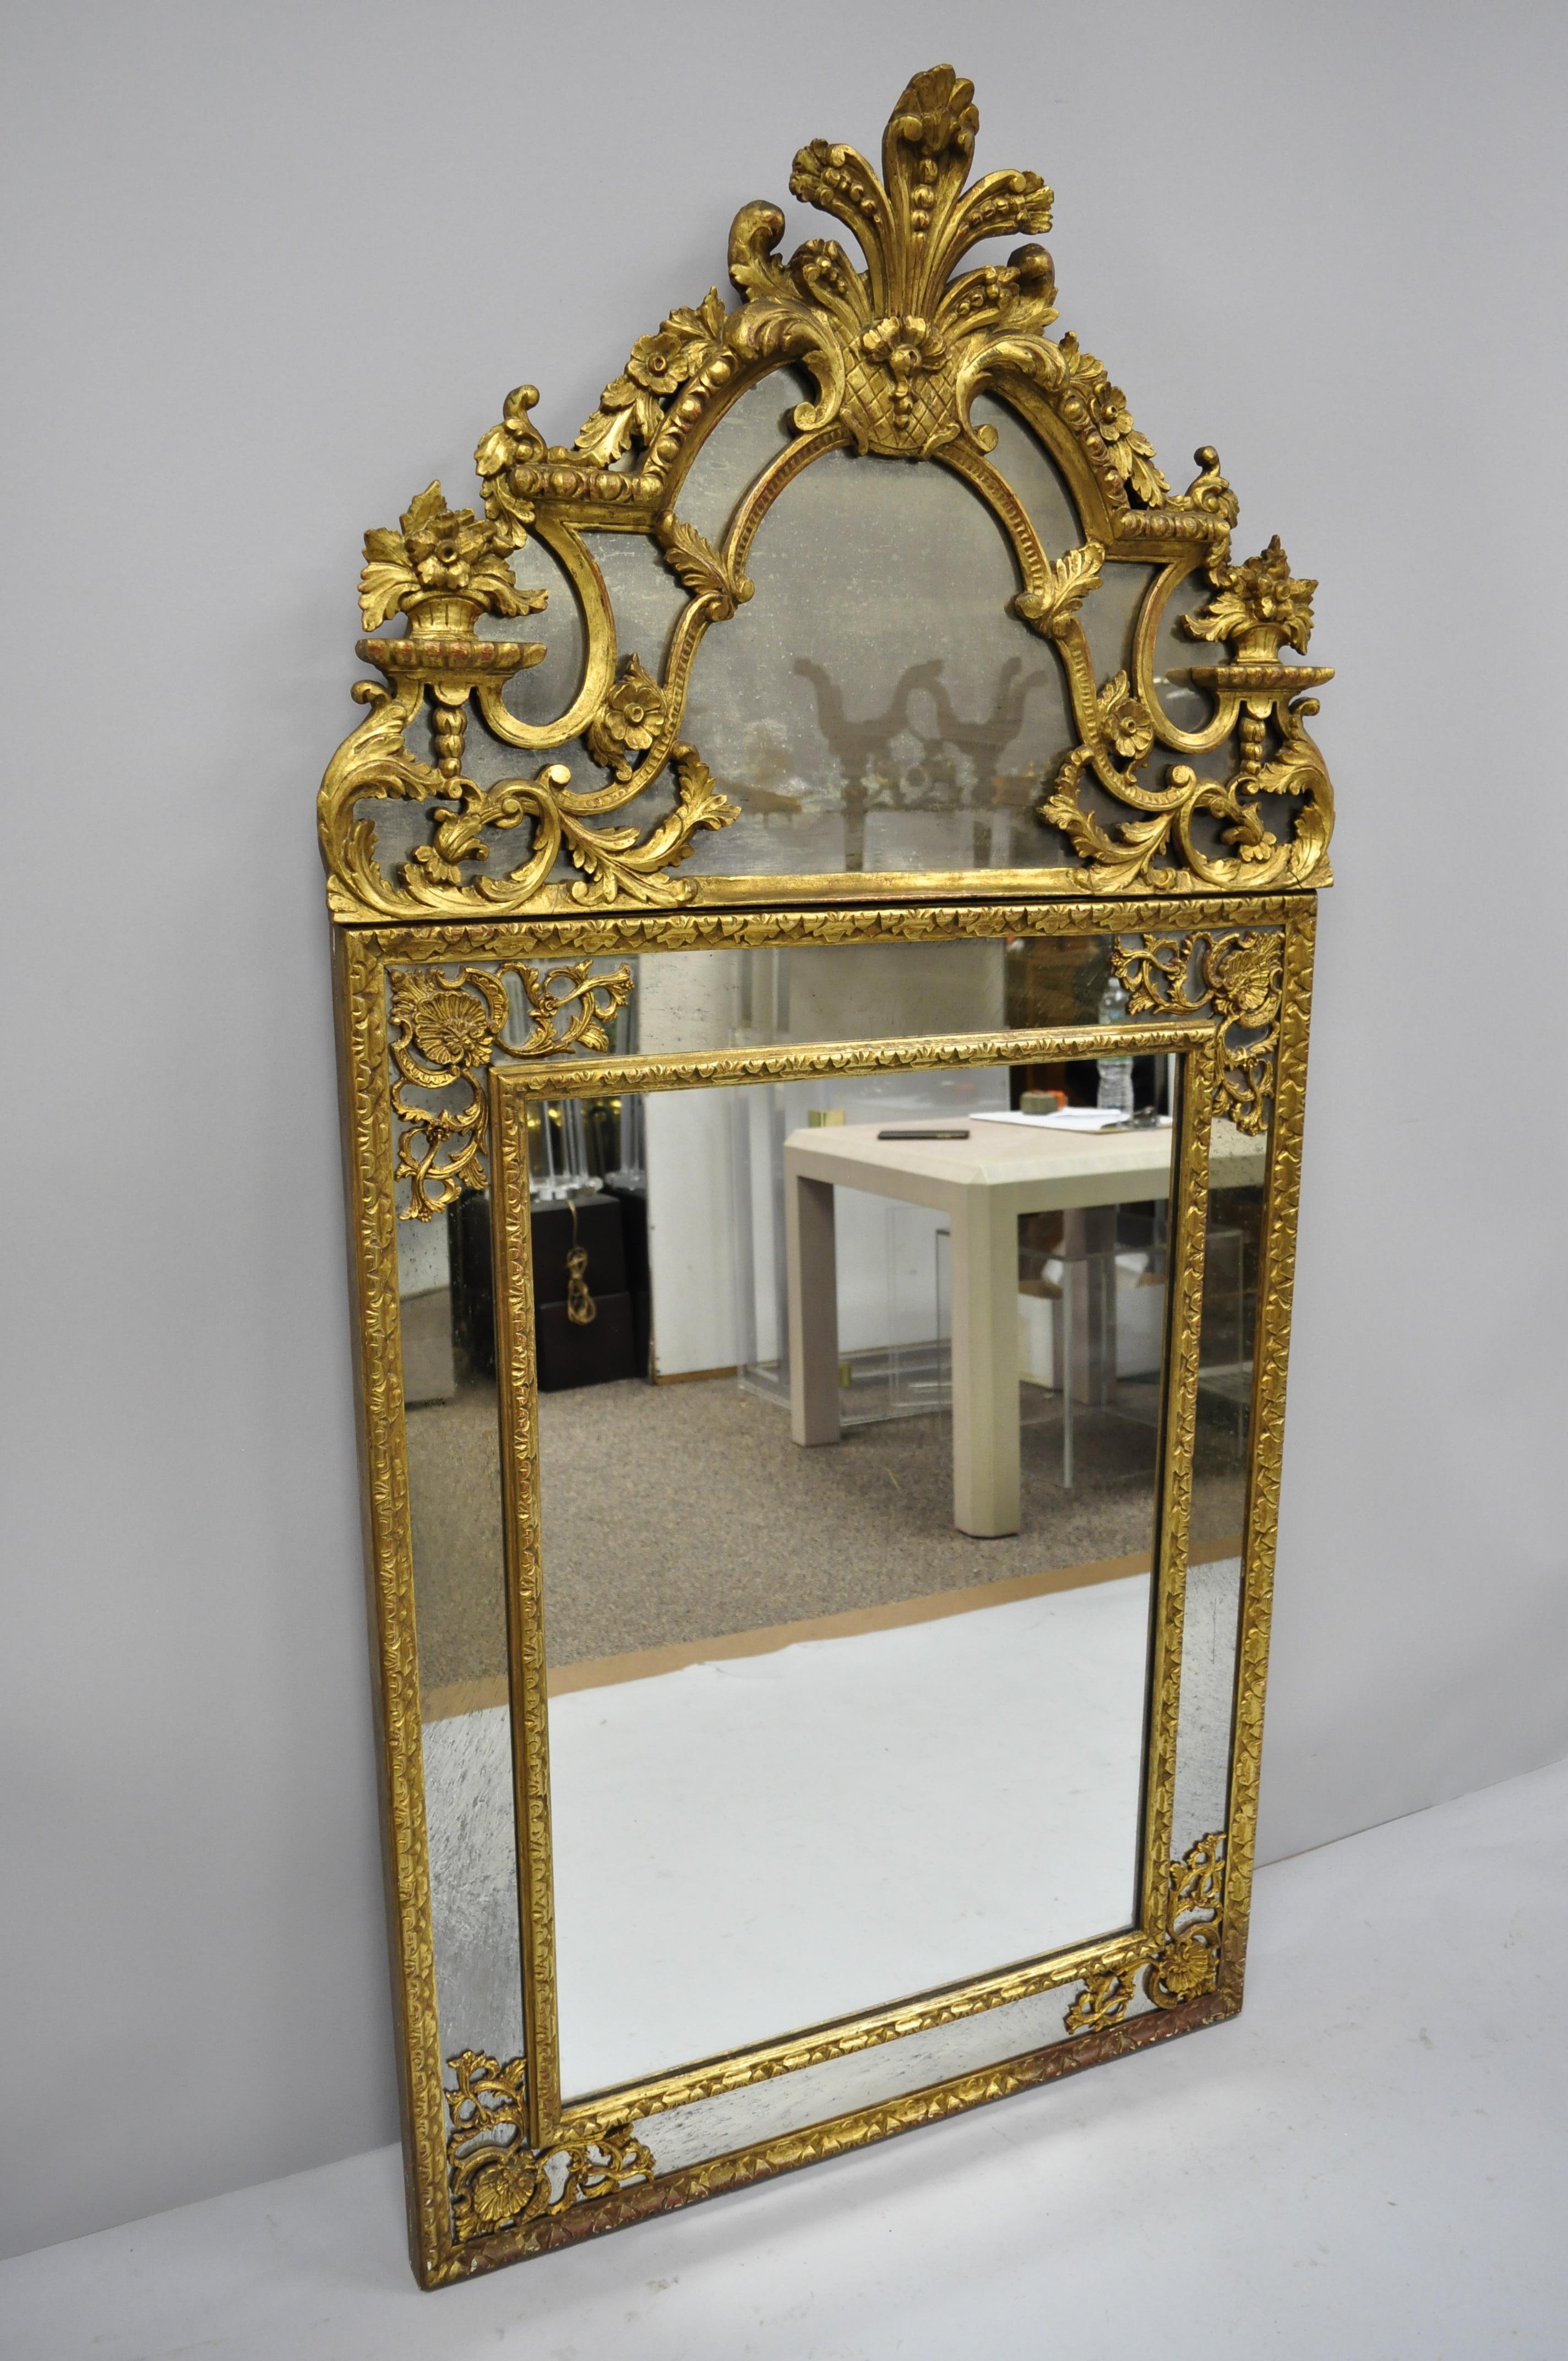 Antique French Louis XV Rococo Style gold trumeau console wall mirror. Item features aged glass to upper crest mirror, ornate floral and leafy scroll work, very impressive form, circa early 20th century. Measurements: 60